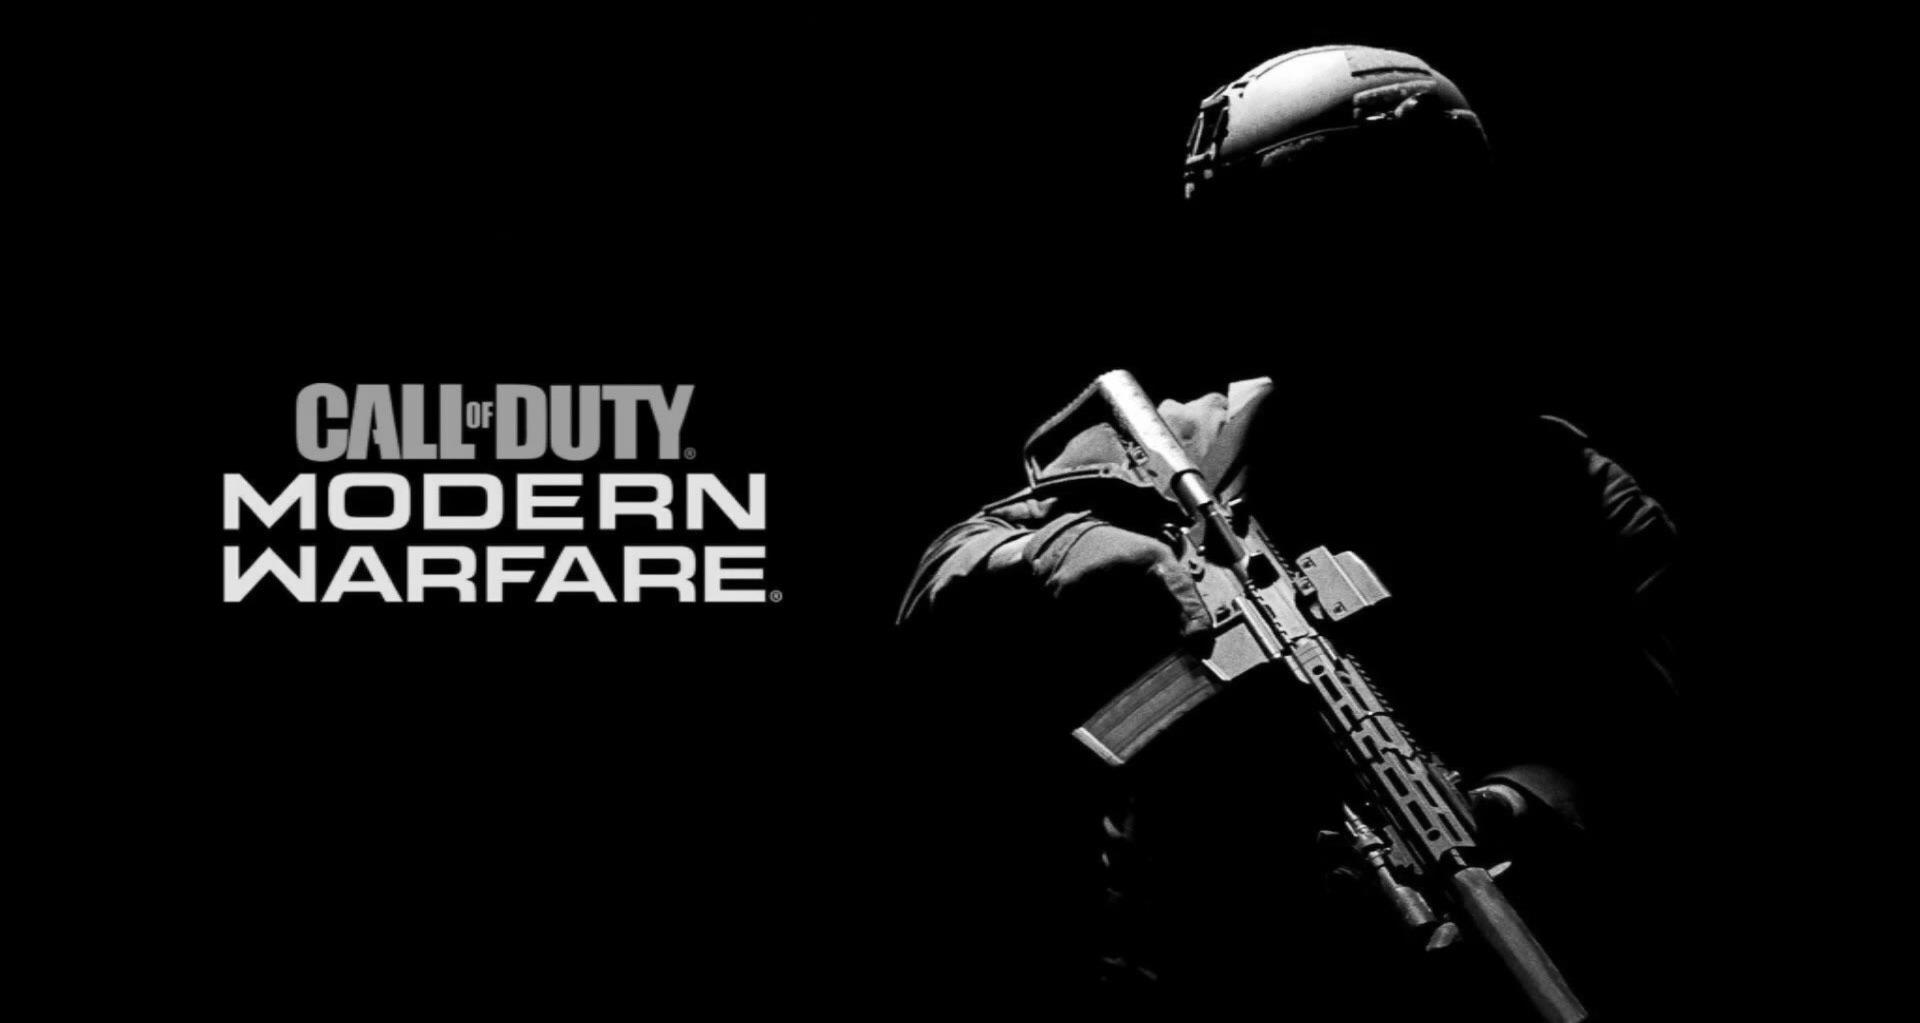 Turned the best screen into an AMOLED wallpaper for all the hyped people including myself: modernwarfare